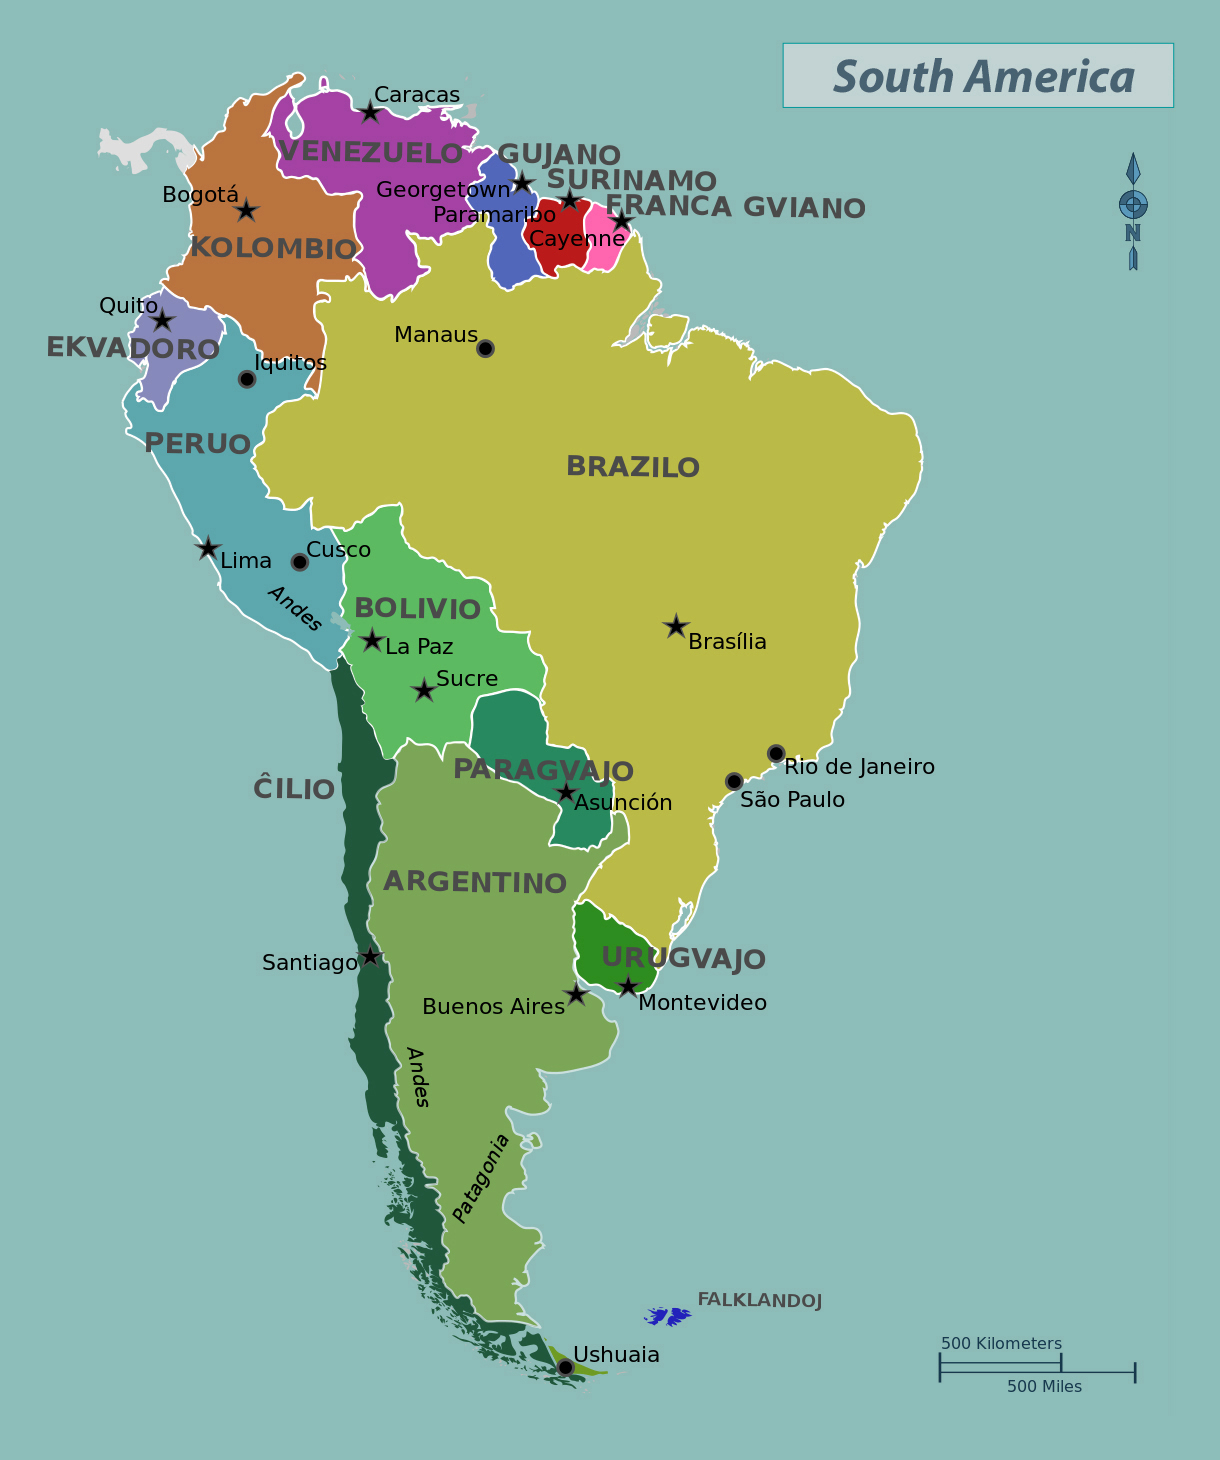 Maps of South America and South American countries | Political maps